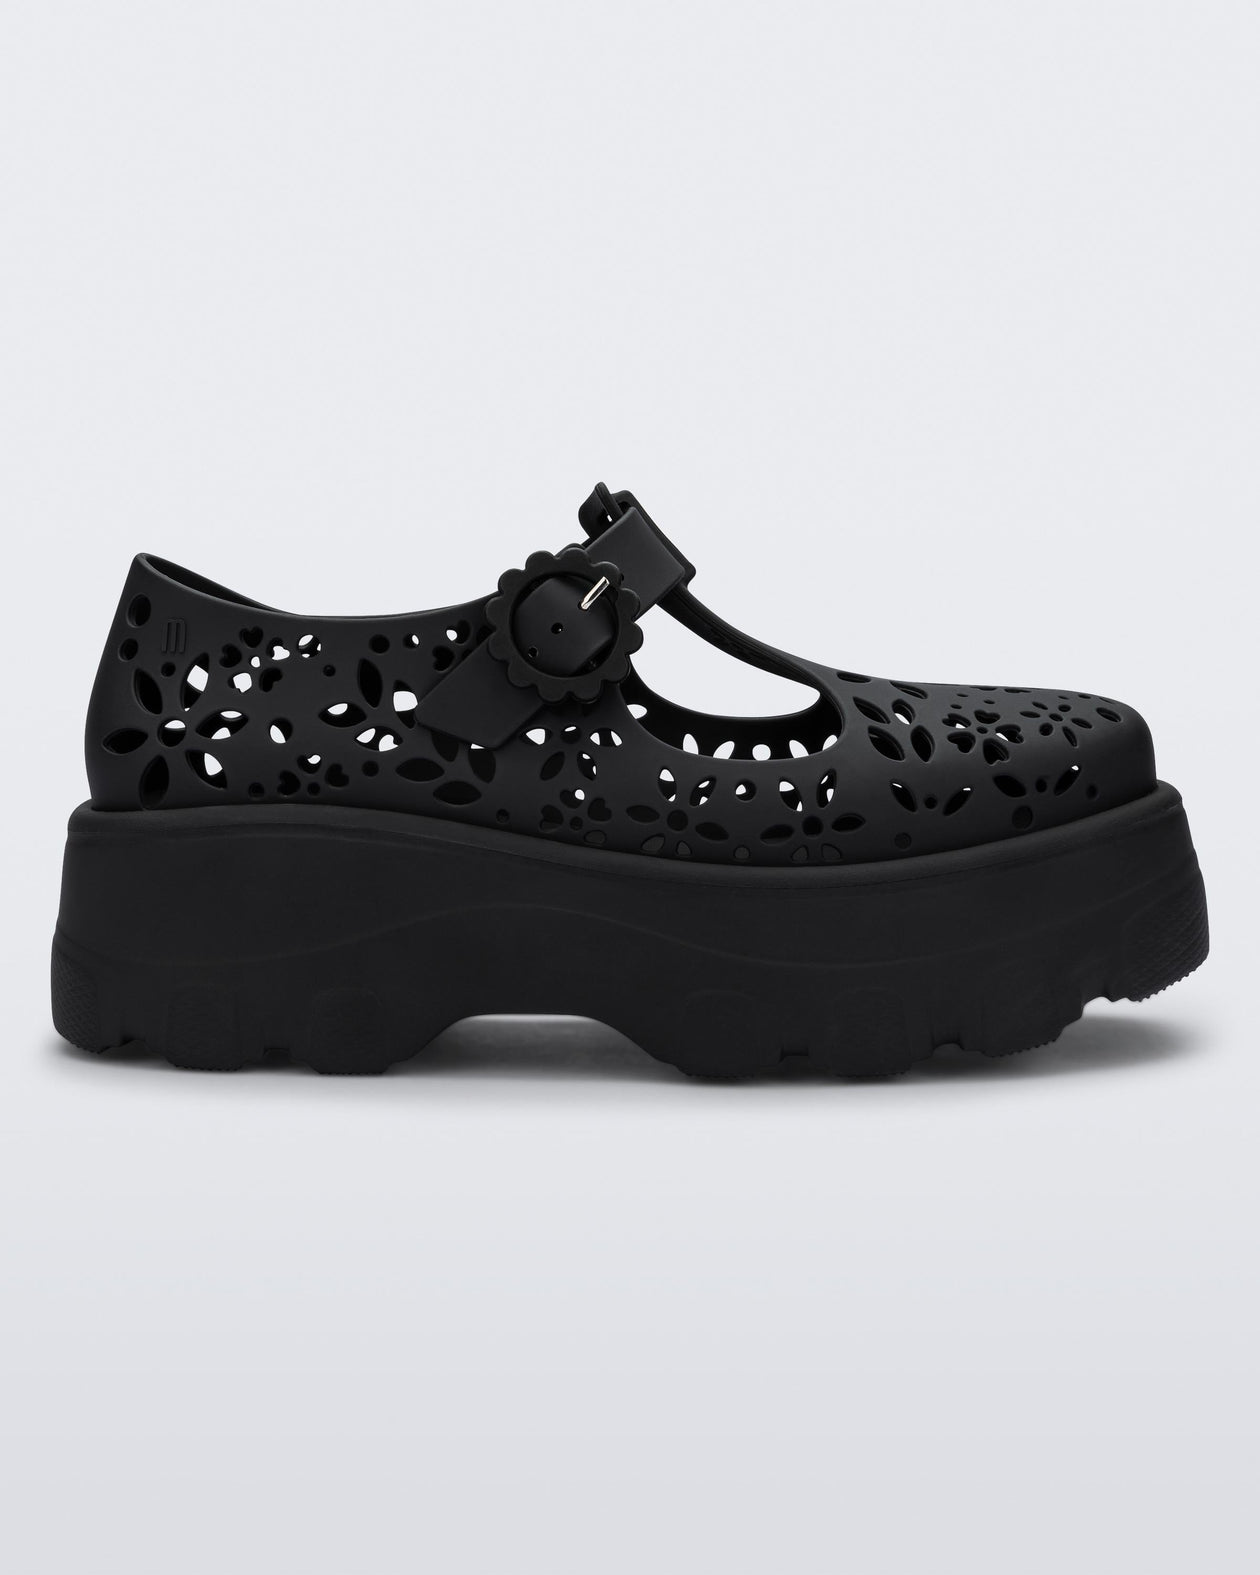 Side view of a black Kick Off Lace women's platform shoe with buckle.